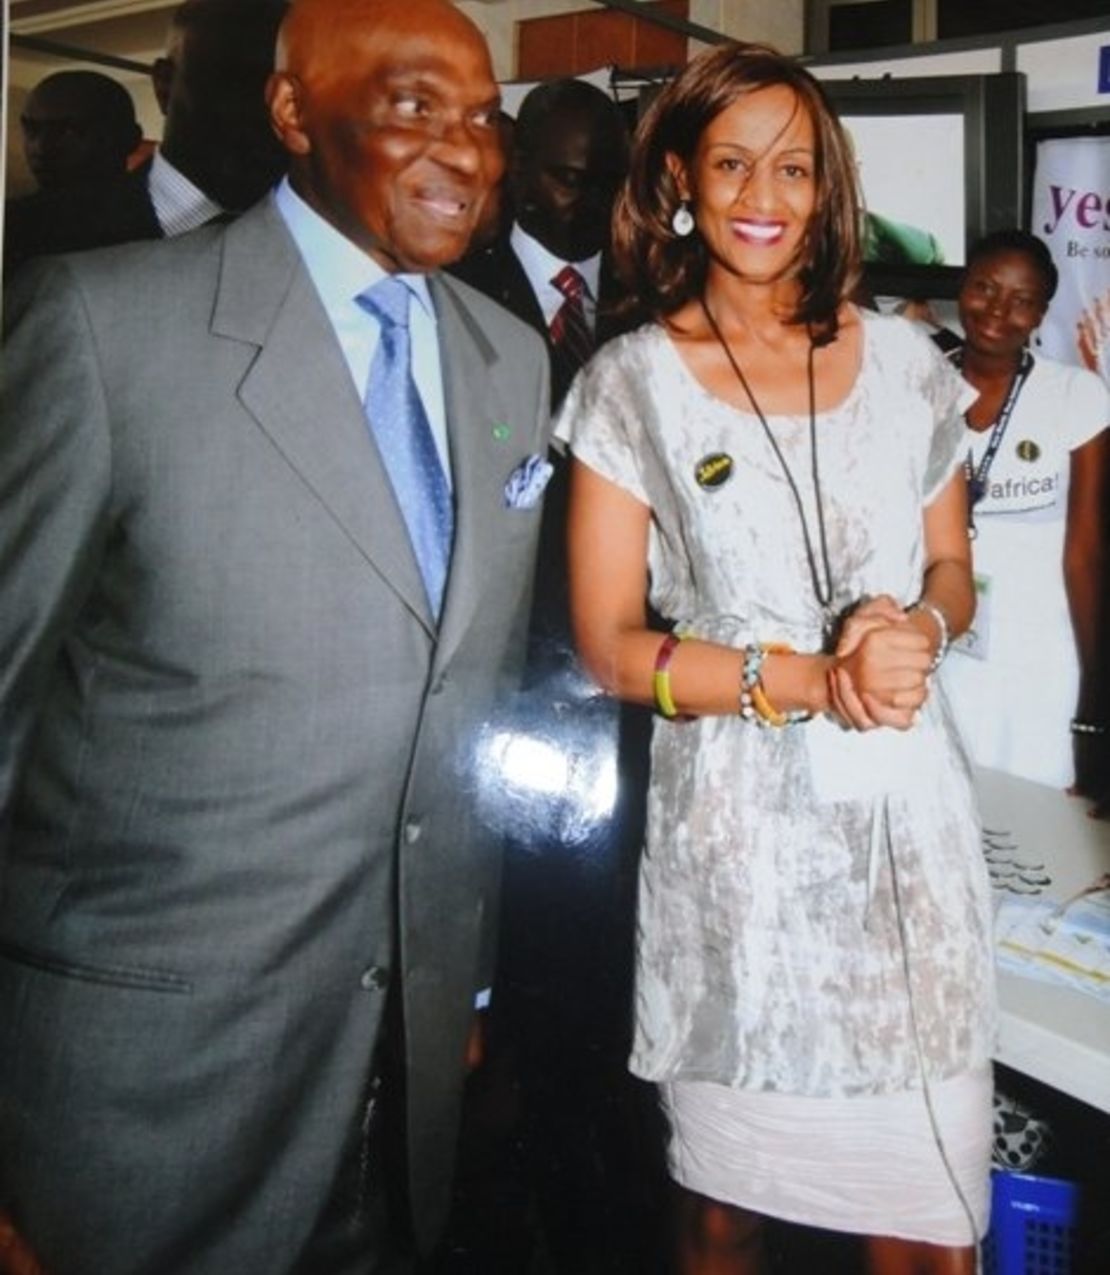 Sophia Bekele, executive director of DotConnectAfrica, alongside Senegal President Abdoulaye Wade at an ICANN conference in Dakar last month